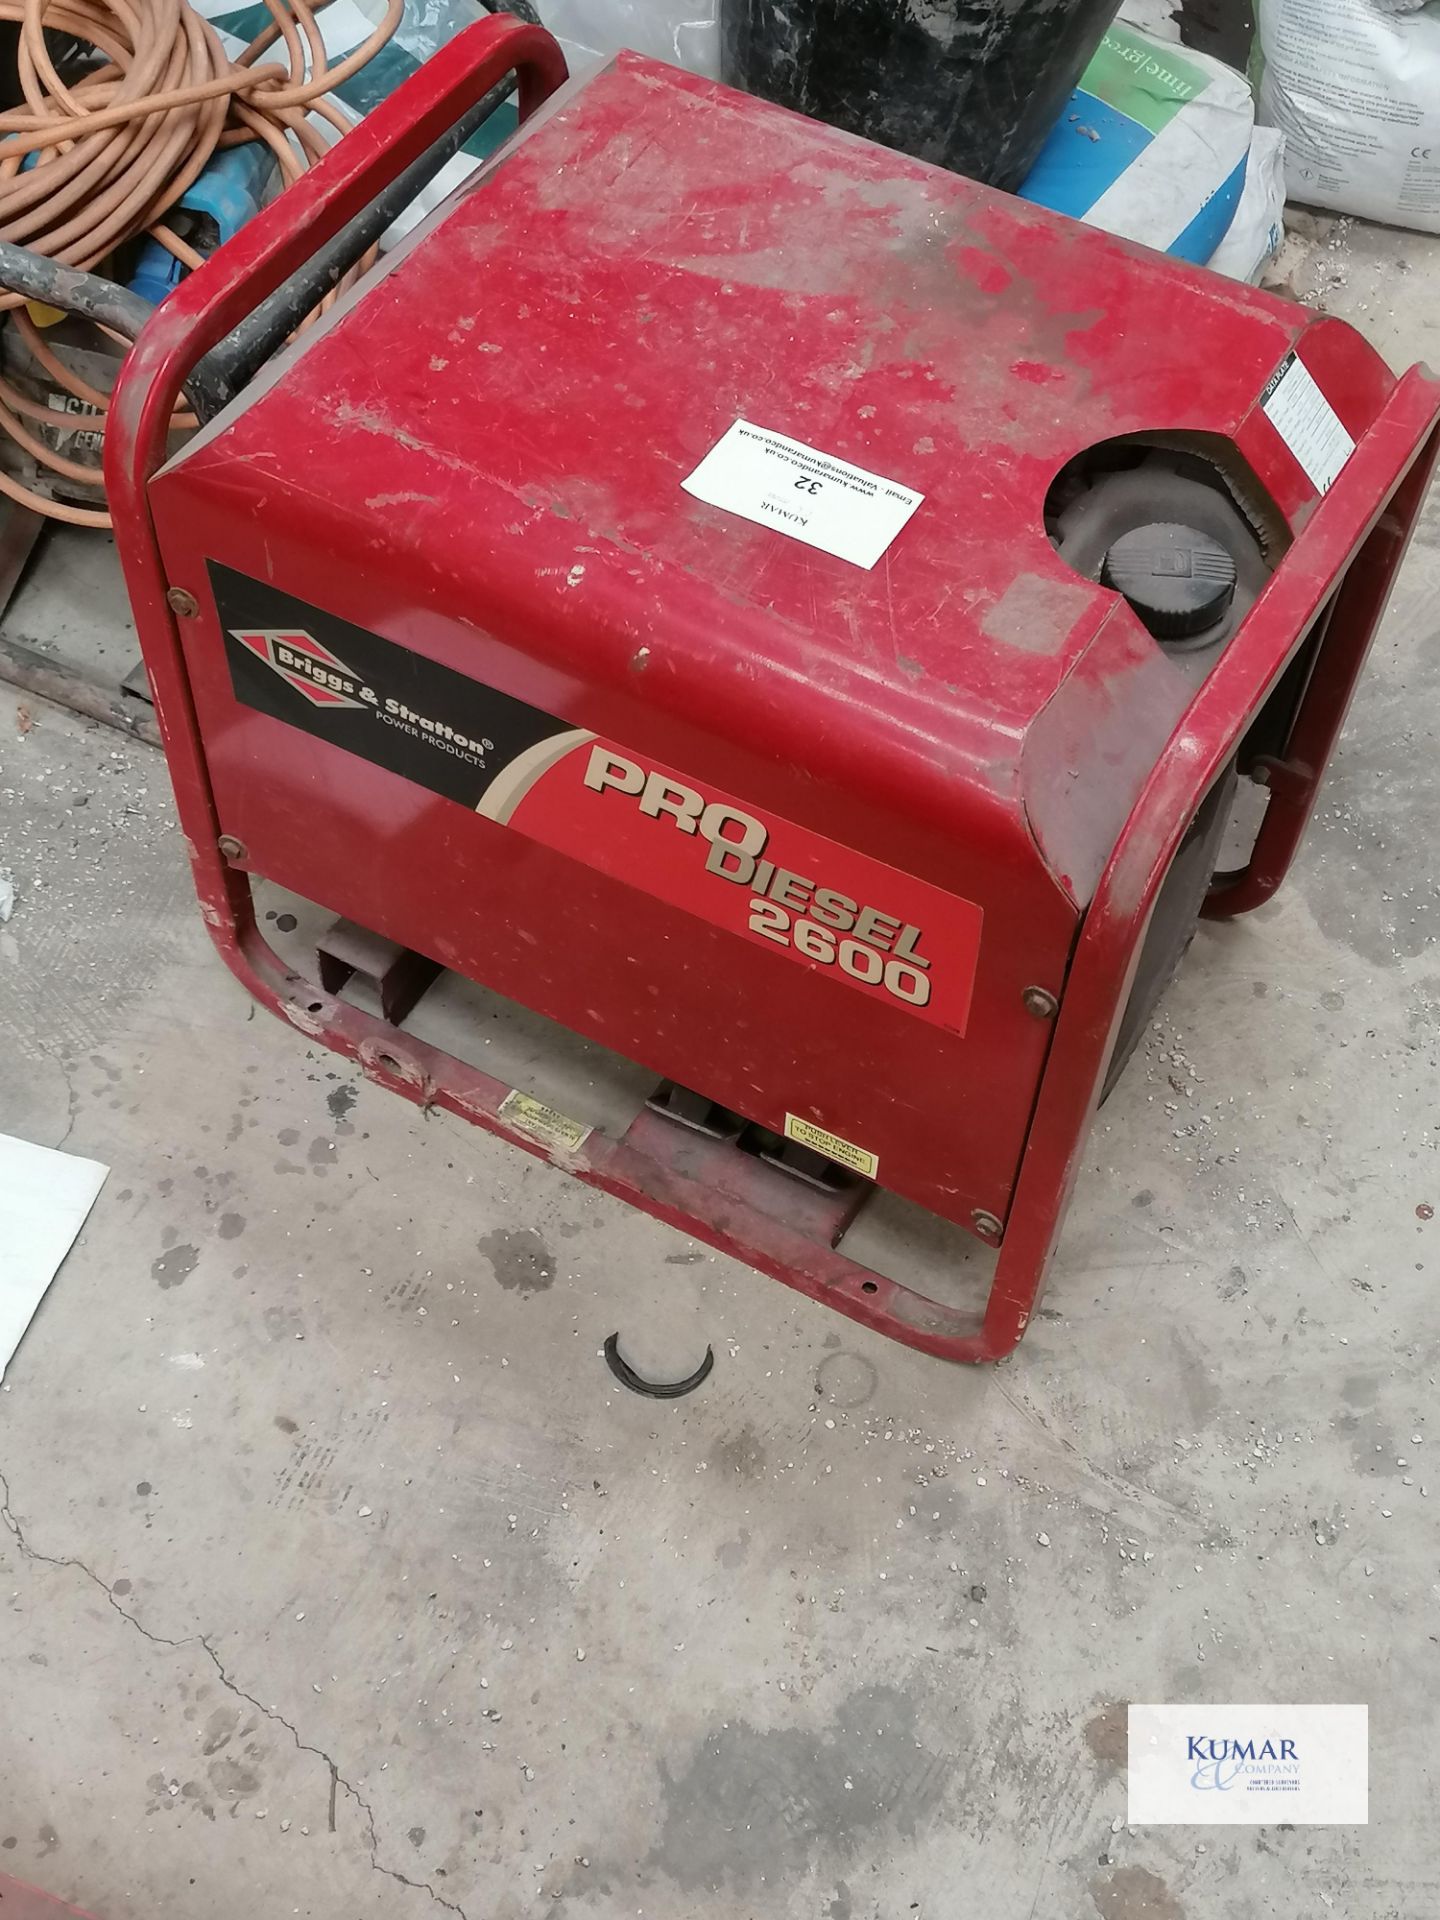 Briggs & Stratton Model 1873-0, Series Pro Diesel 2600, Rated Power 2100 - 2600 W, Serial No. 091340 - Image 3 of 4